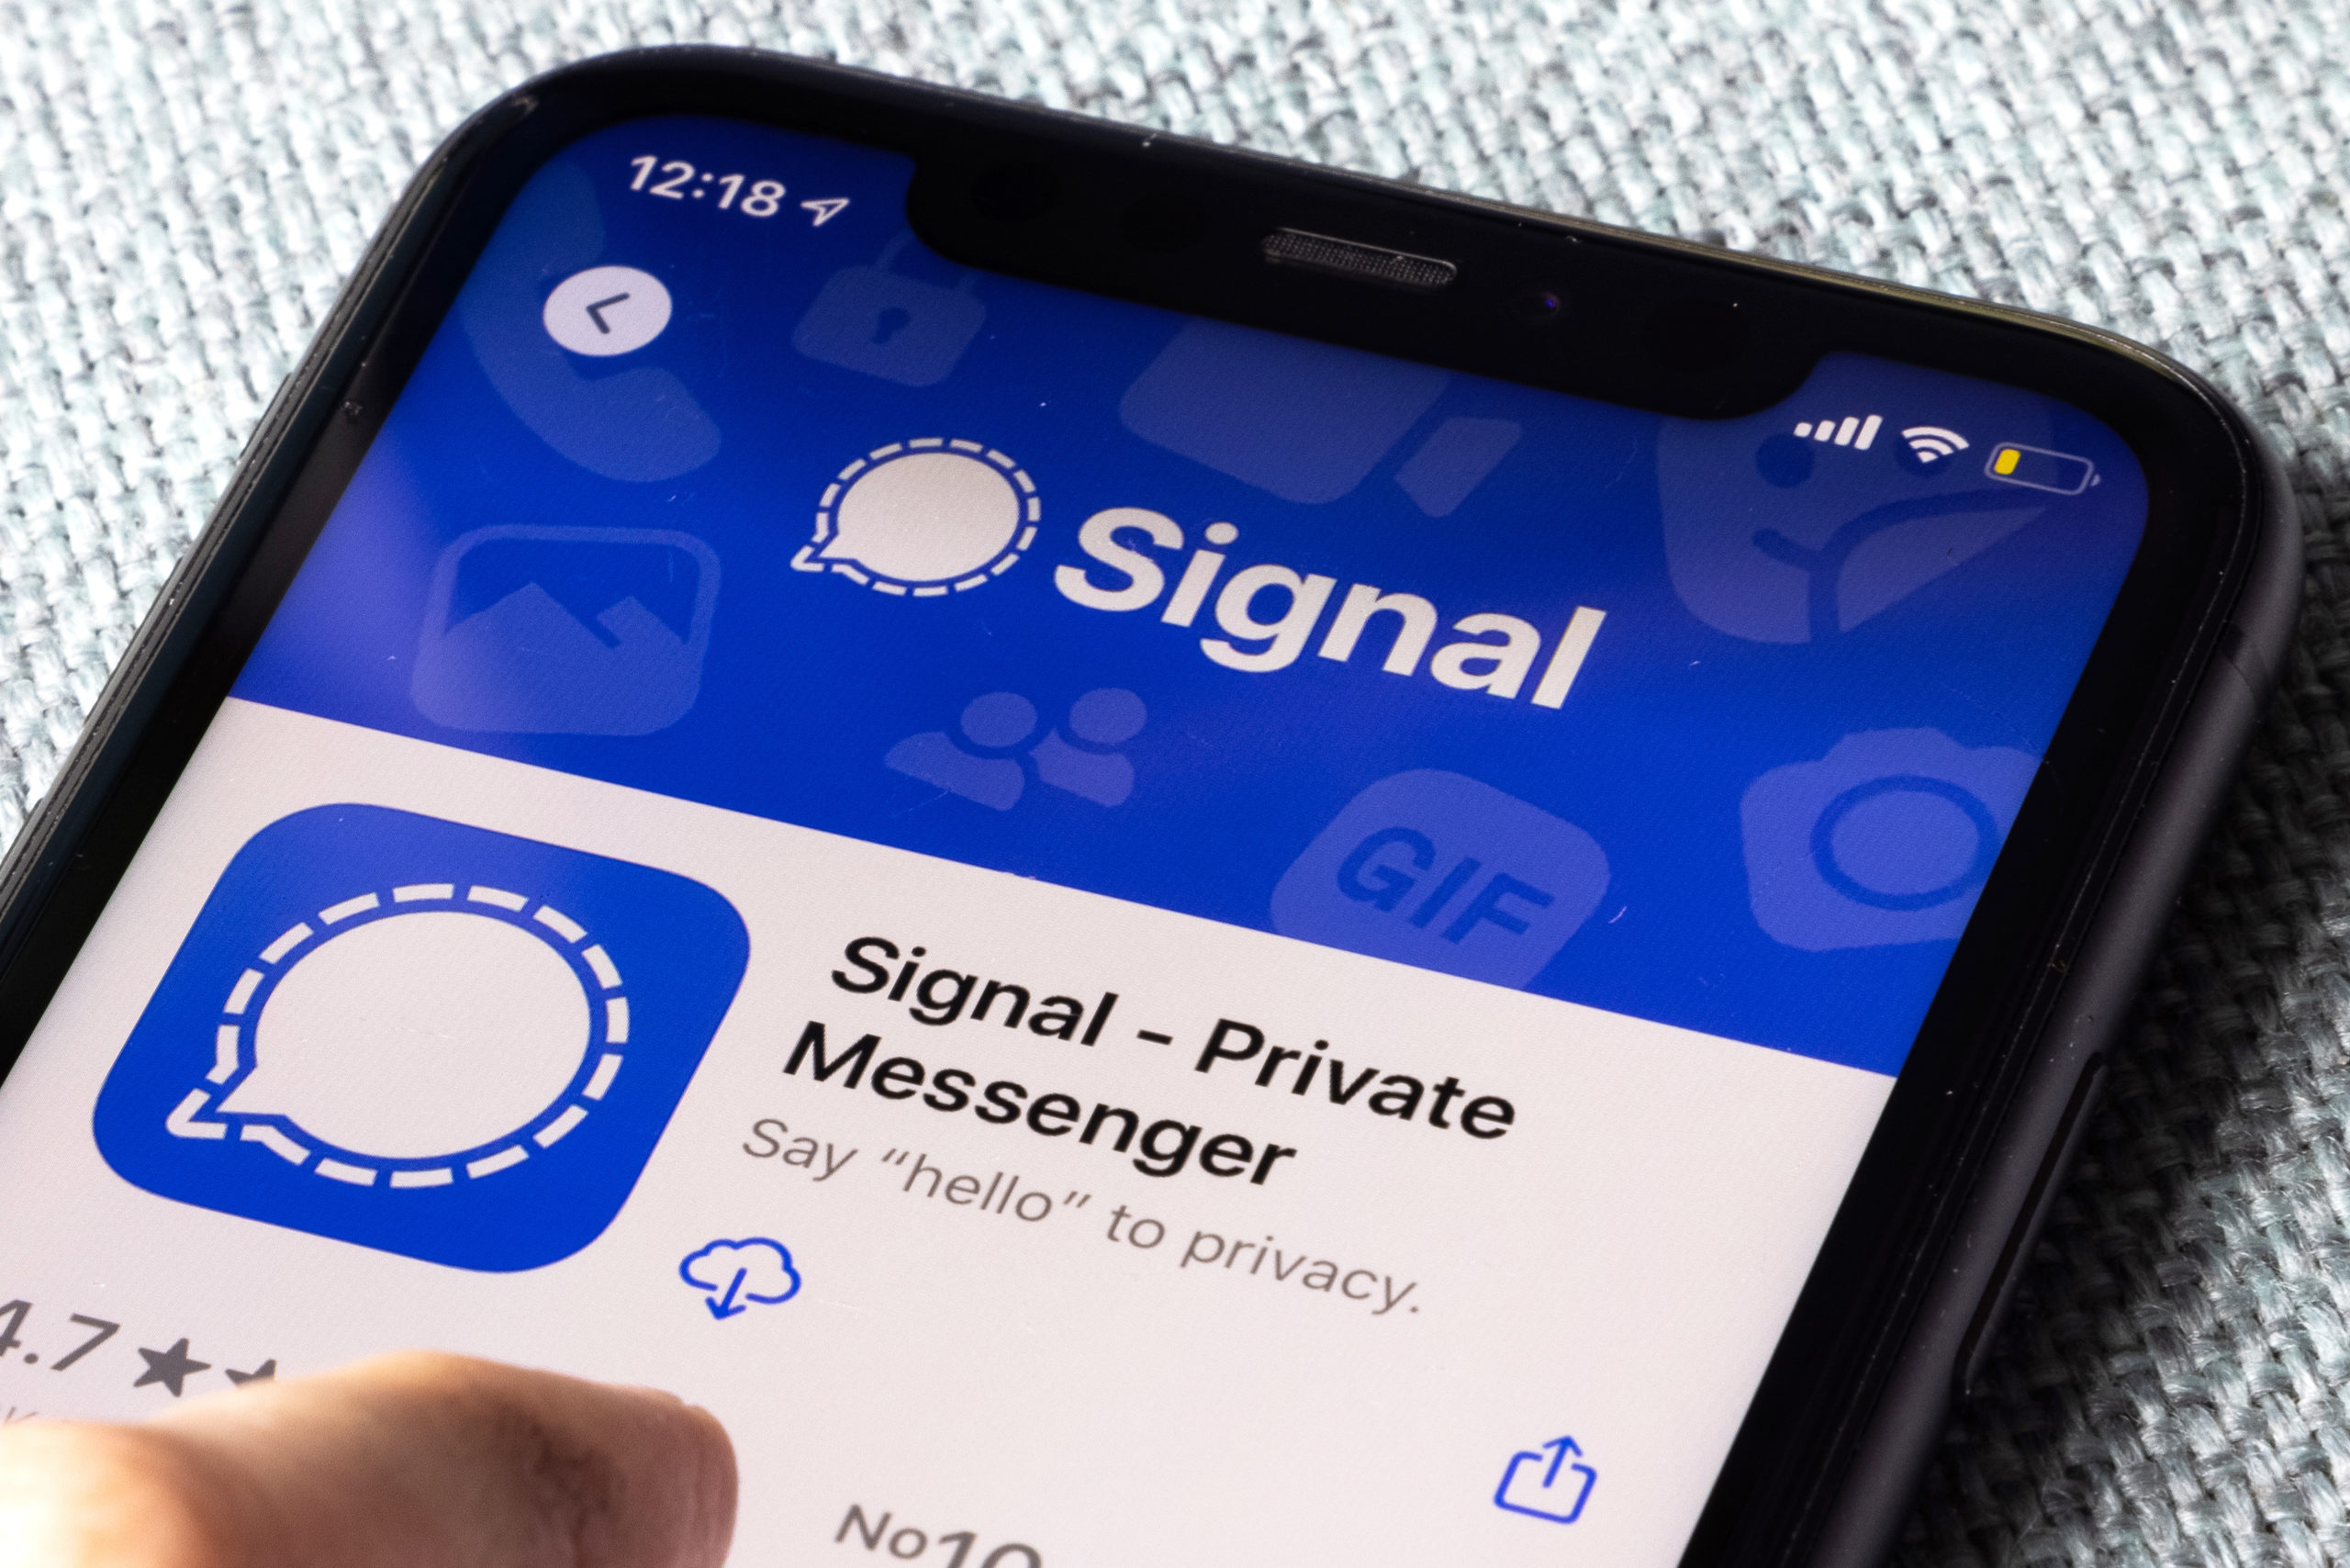 signal like feature in WhatsApp now